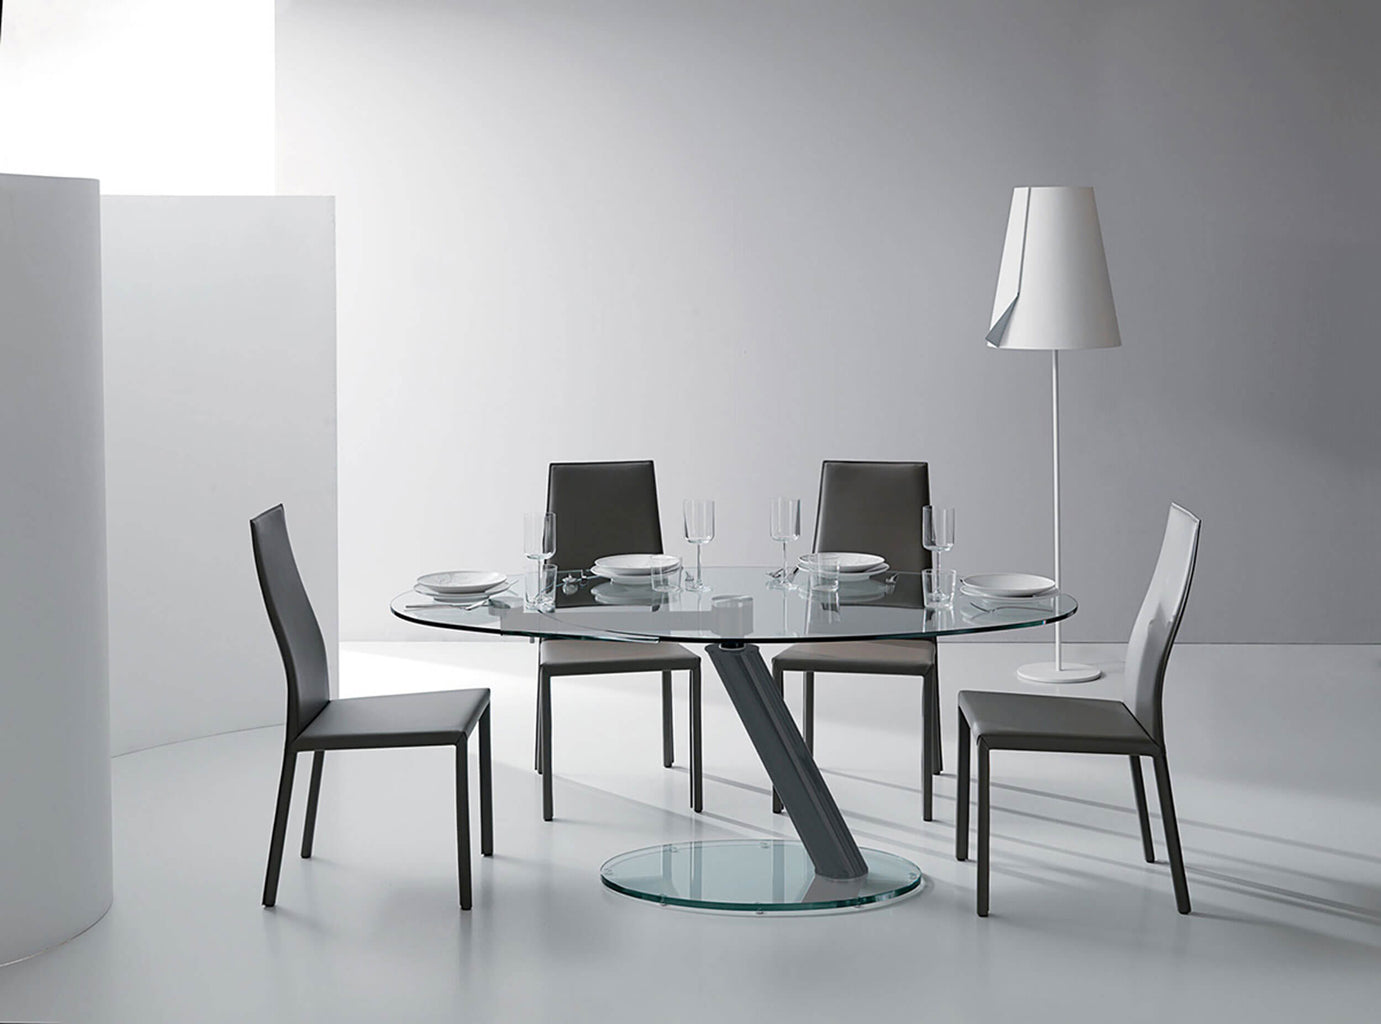 YumanMod Onda Extendable Oval Dining Table 39 x 53 - Graphite Metal Base Glass Top OZ01.07.02 Dining Tables Topture